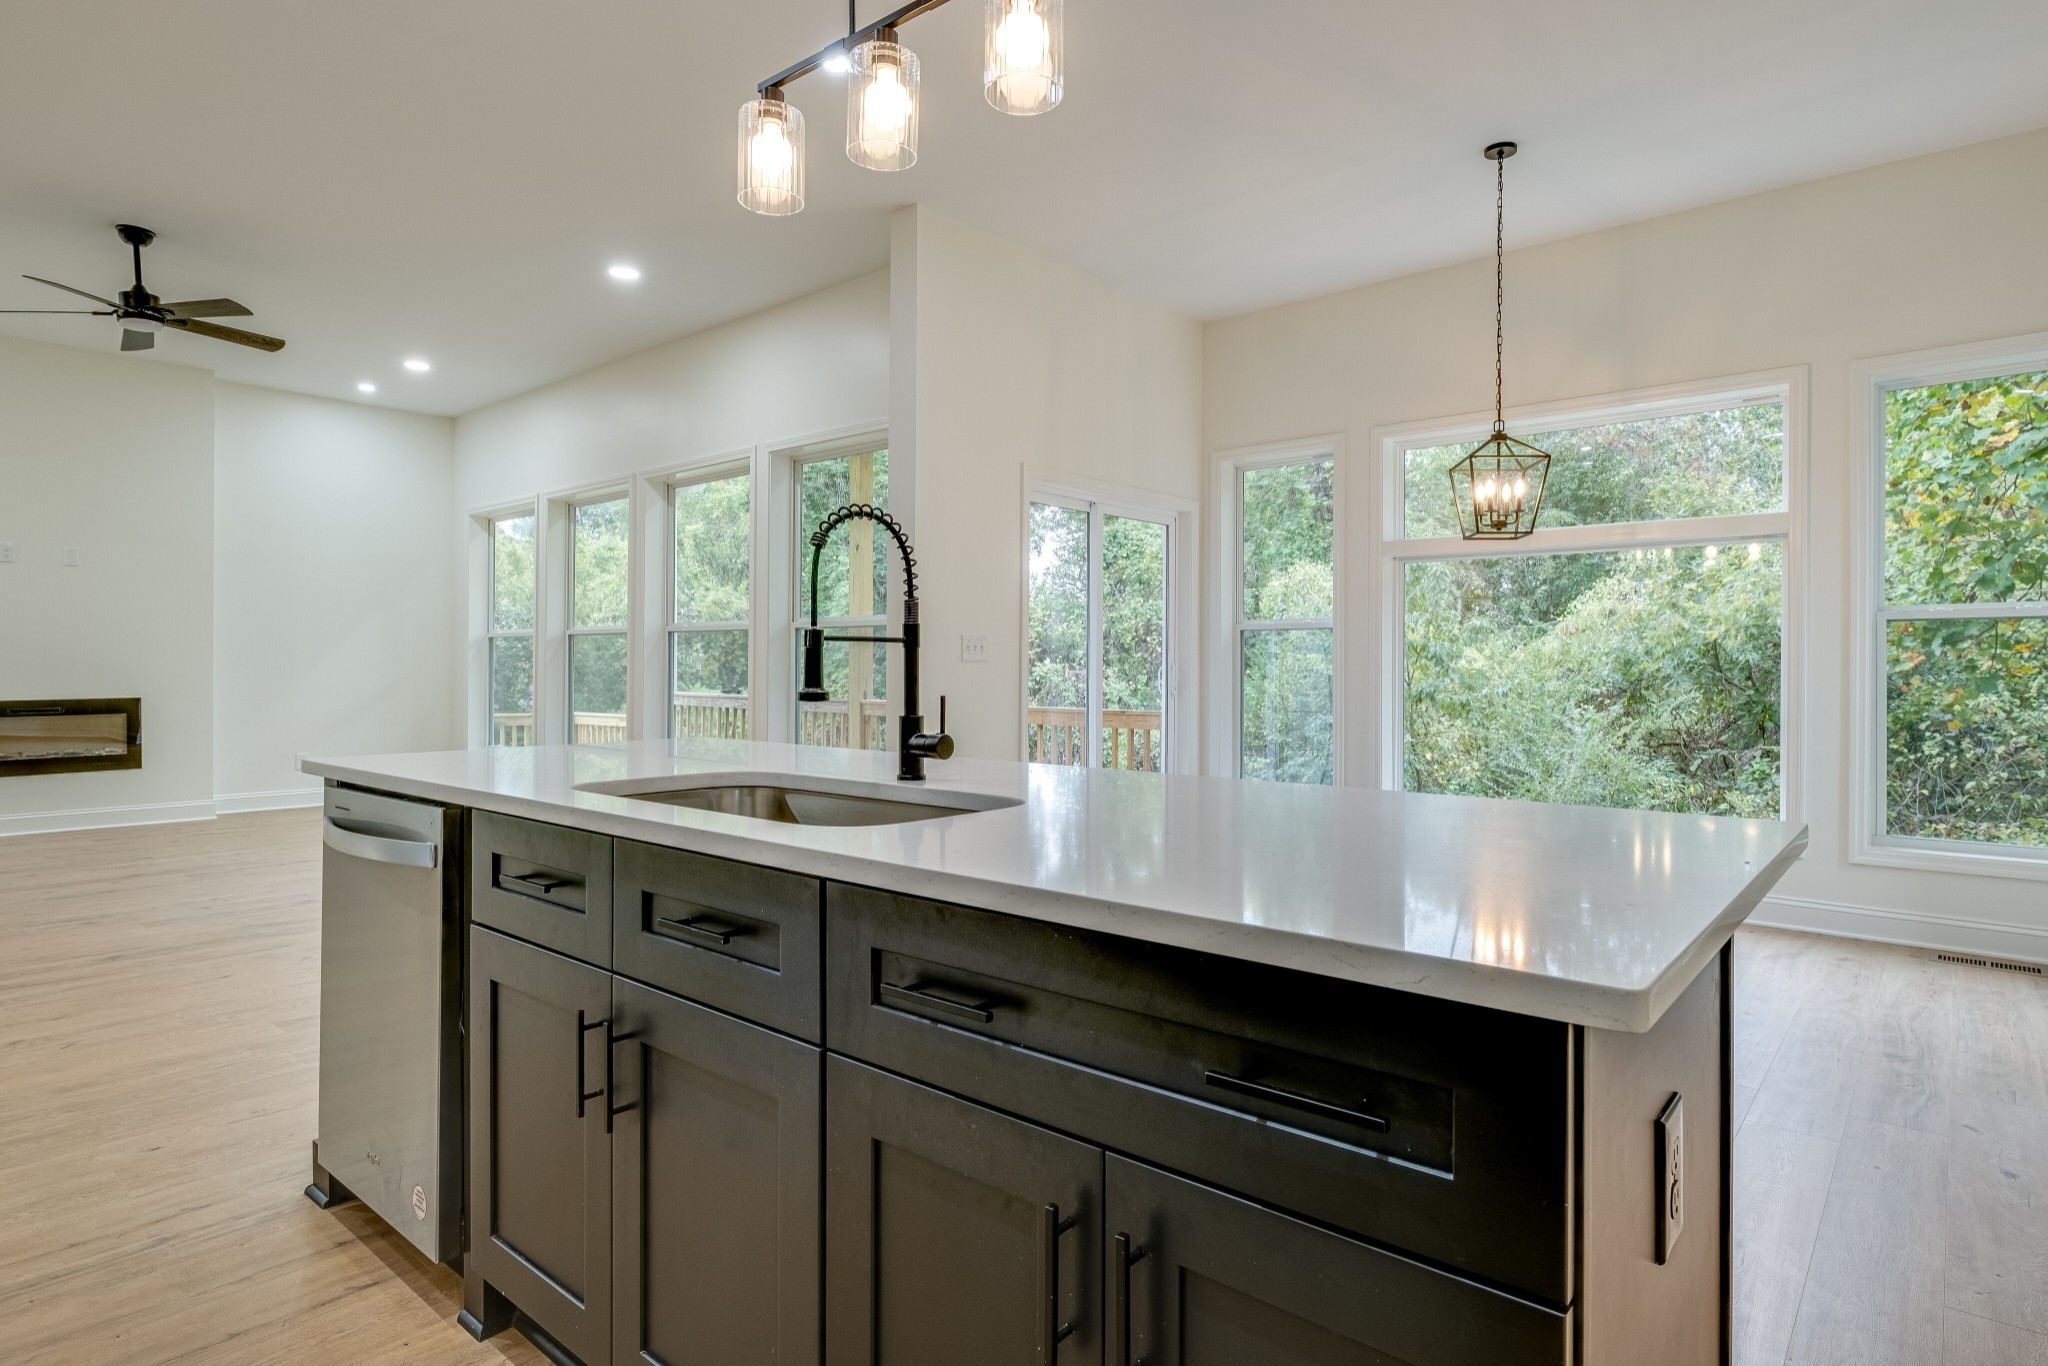 a view of kitchen with kitchen island a sink appliances cabinets and a large window